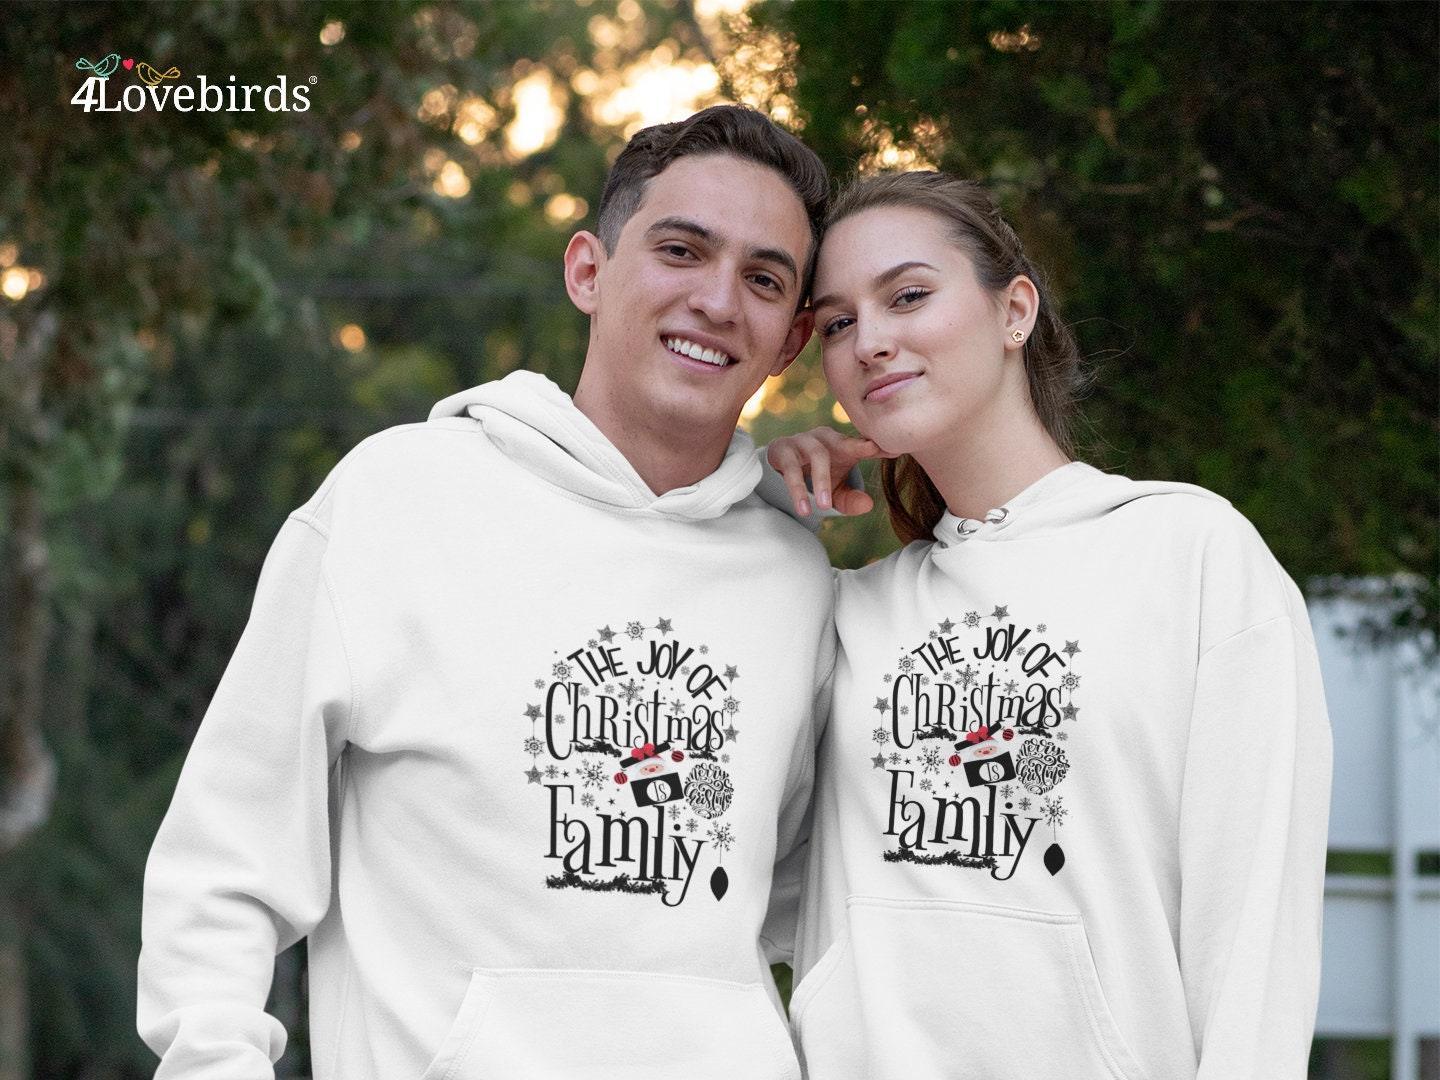 The Joy Of Christmas Is Family Matching Hoodie, Christmas Matching Shirts, Christmas Holiday Shirts, Family Christmas Shirts Funny, Gifts - 4Lovebirds